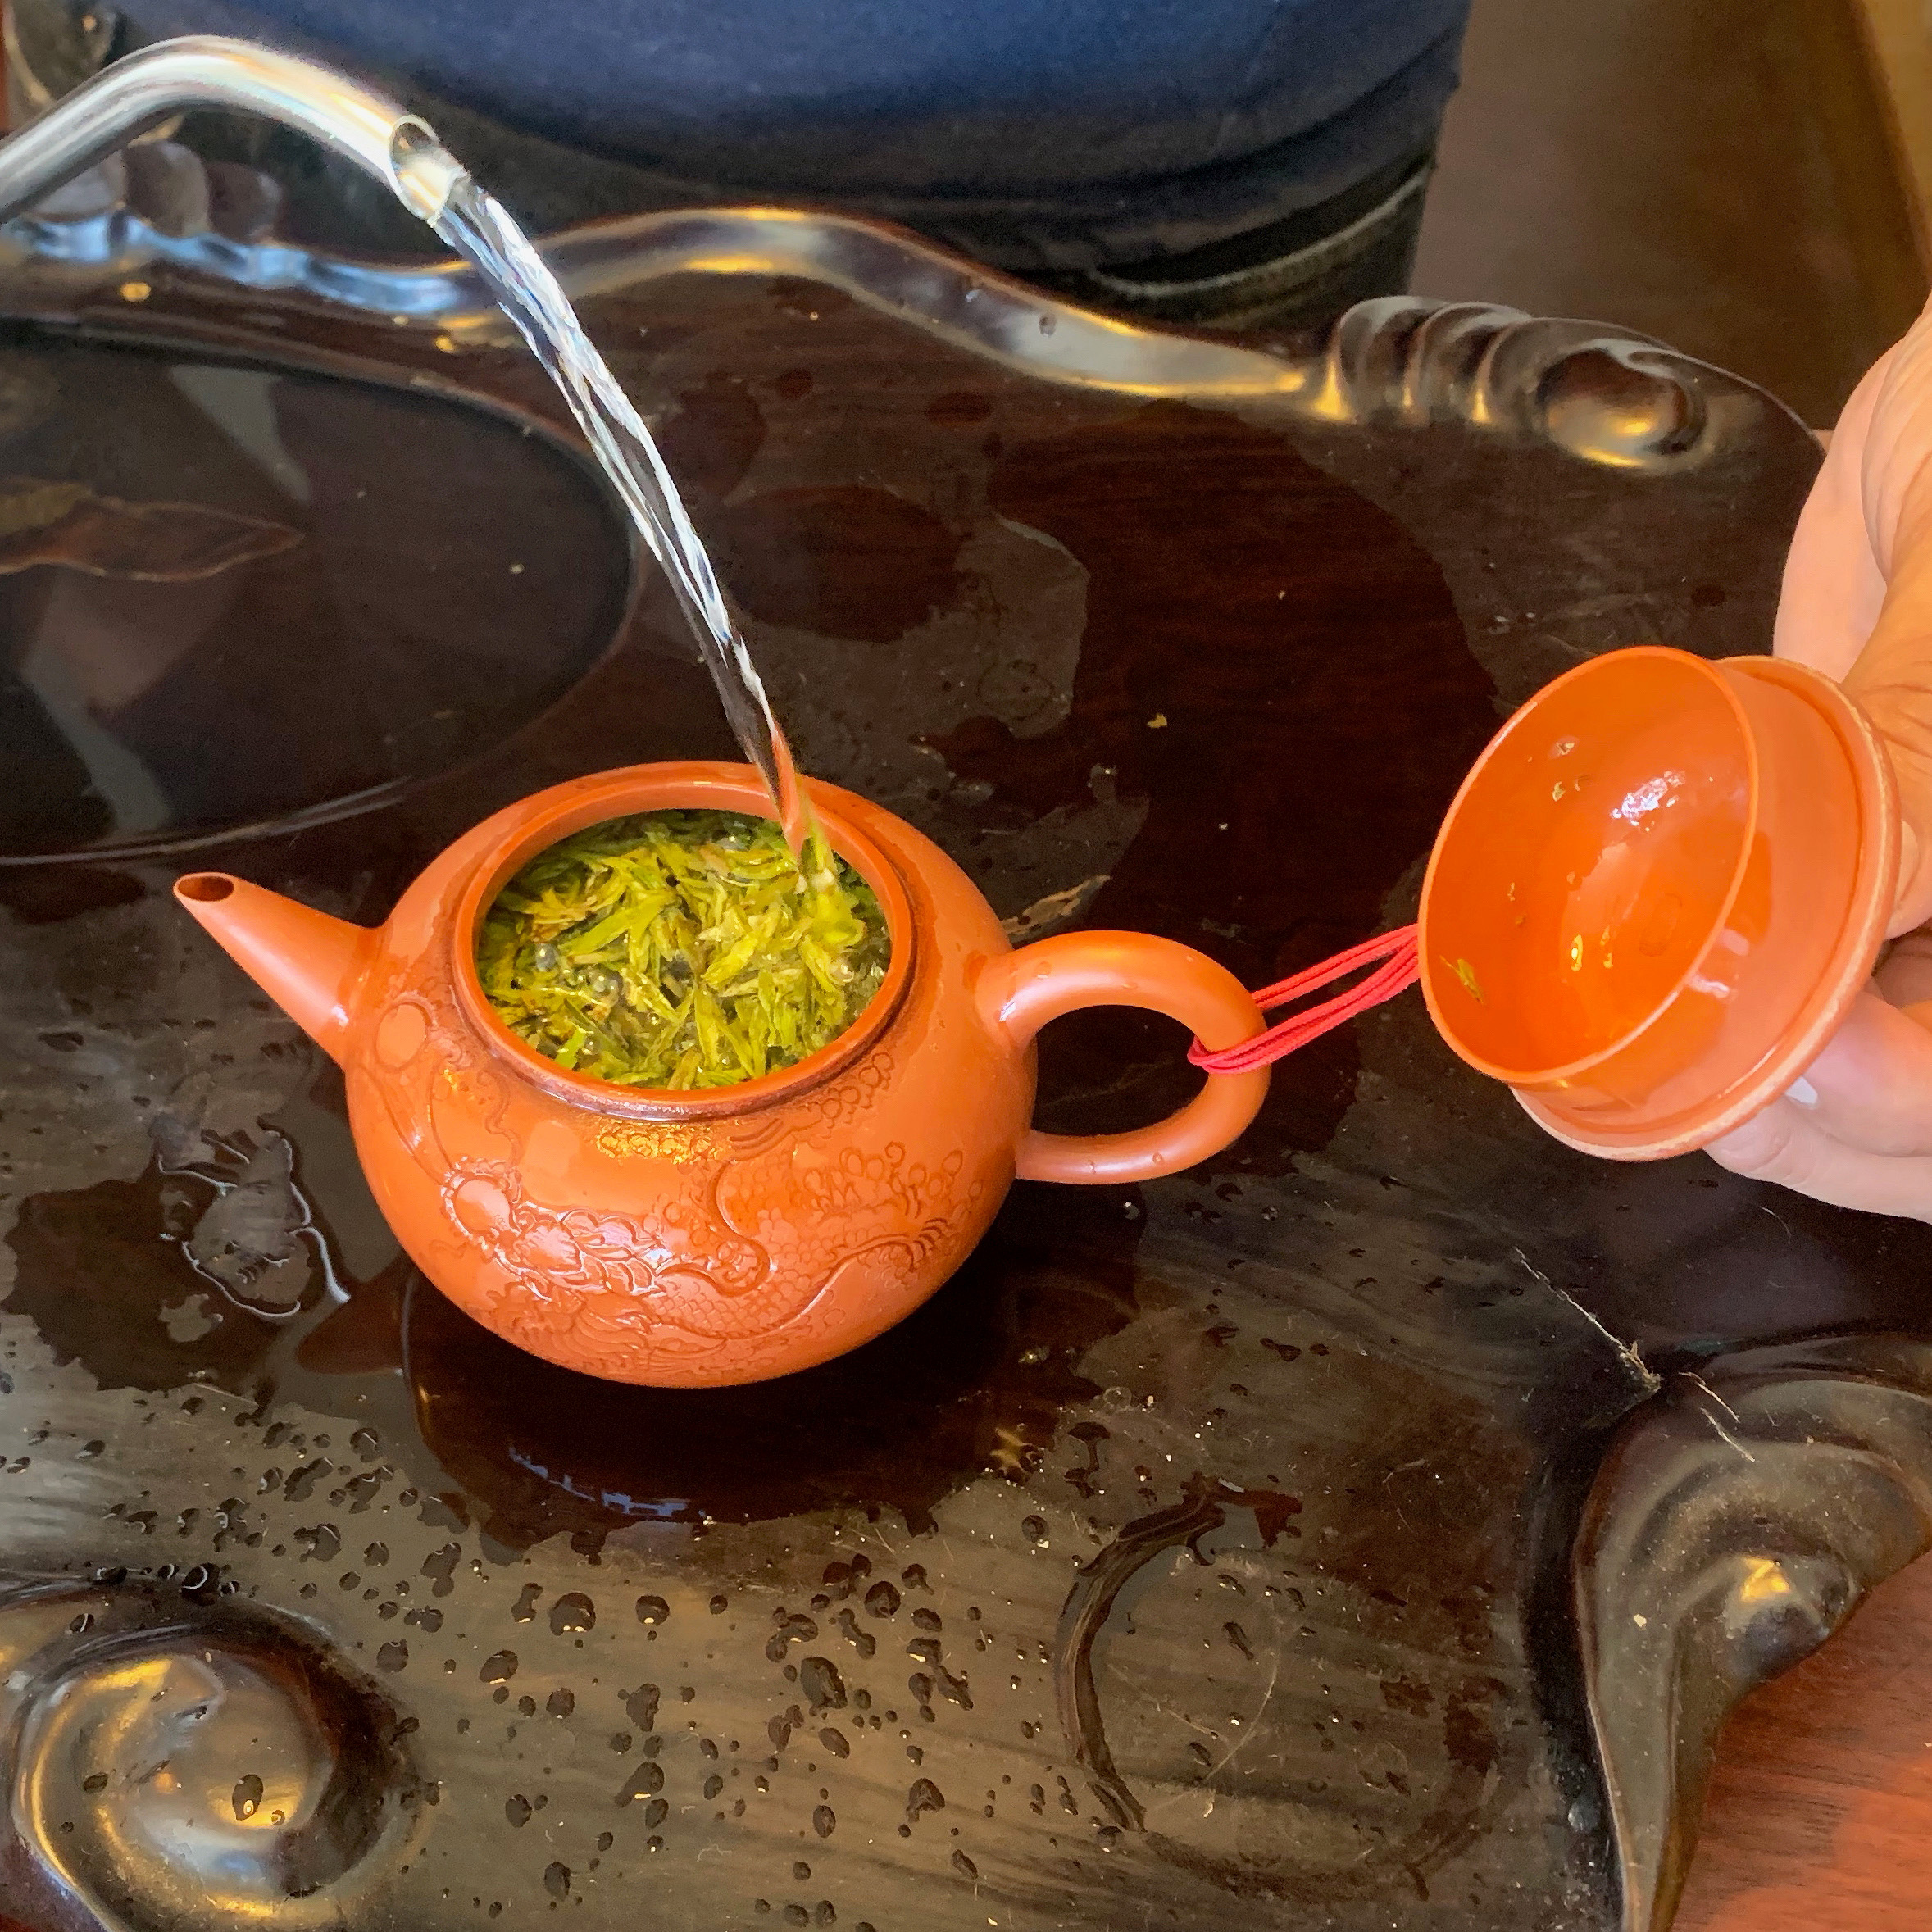 Water pouring from the spout of a kettle into a small red clay tea pot full of green tea leaves. A person's hand holds the lid of the pot open.